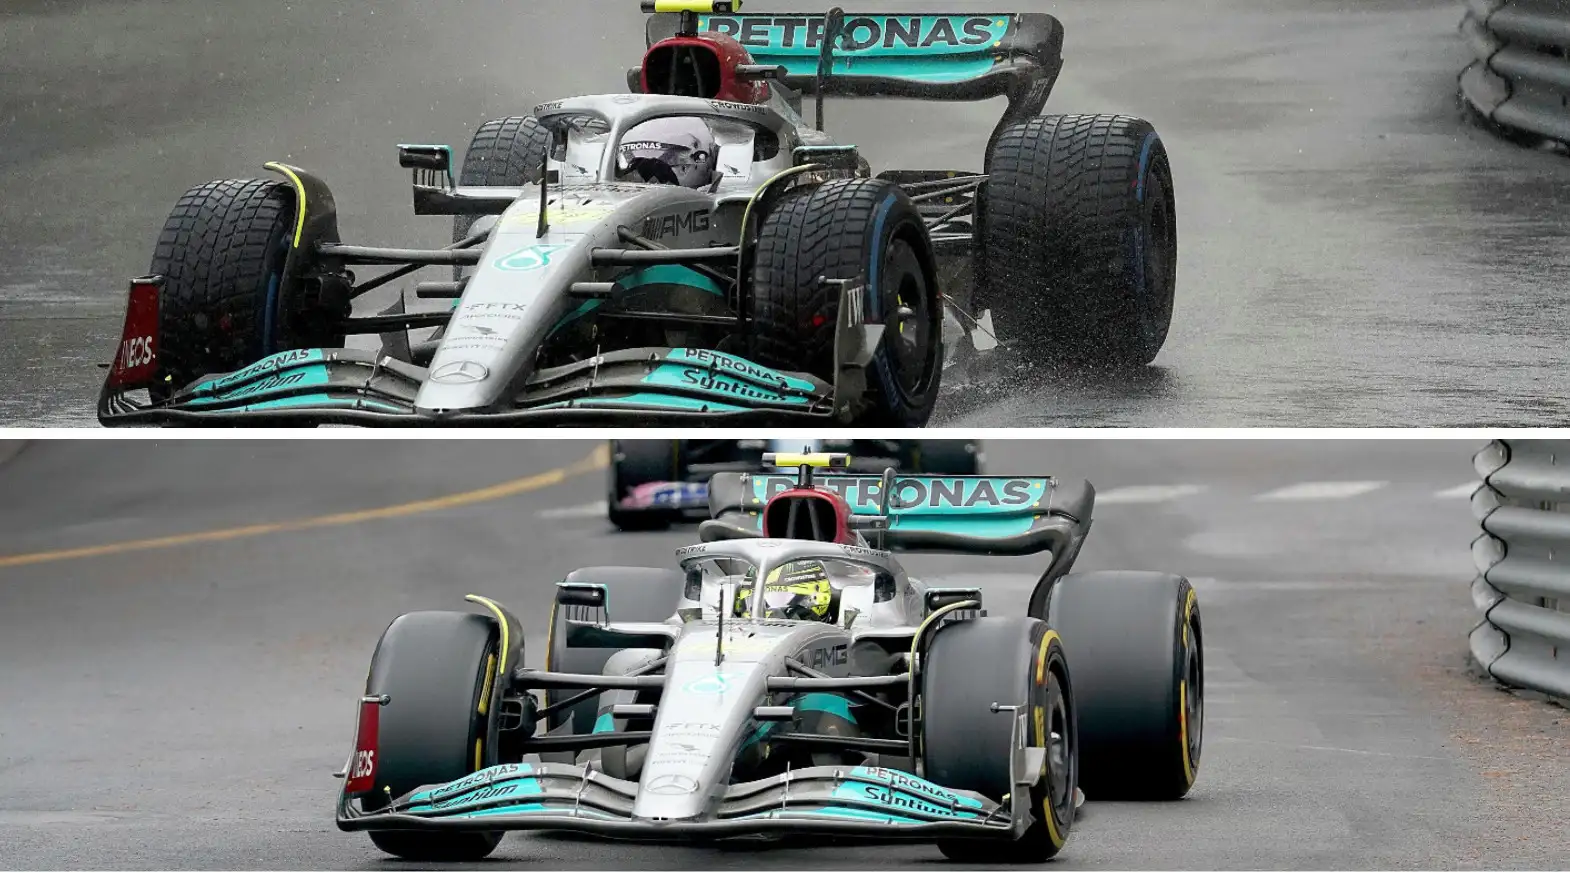 Mercedes' Lewis Hamilton drives with two different helmets at the Monaco Grand Prix. Monte Carlo, May 2022.